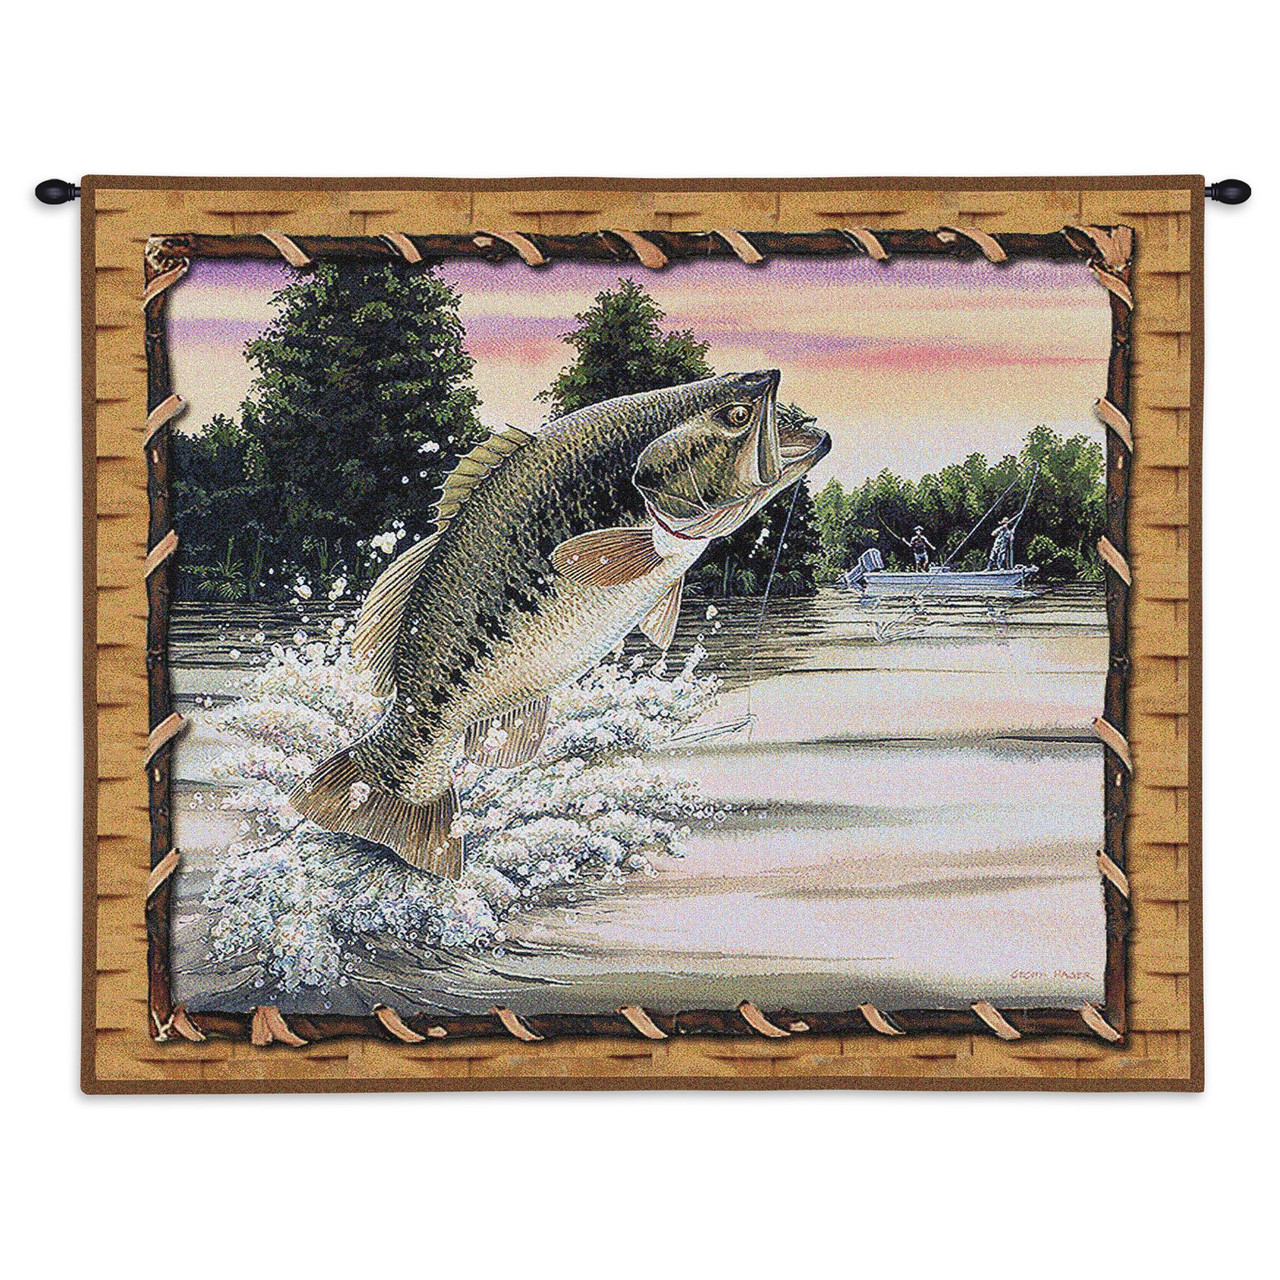 Bass Attack, Woven Tapestry Wall Art Hanging, Bass Outdoorsman Fishing  Cabin Lodge Decor, Cotton, Made in the USA